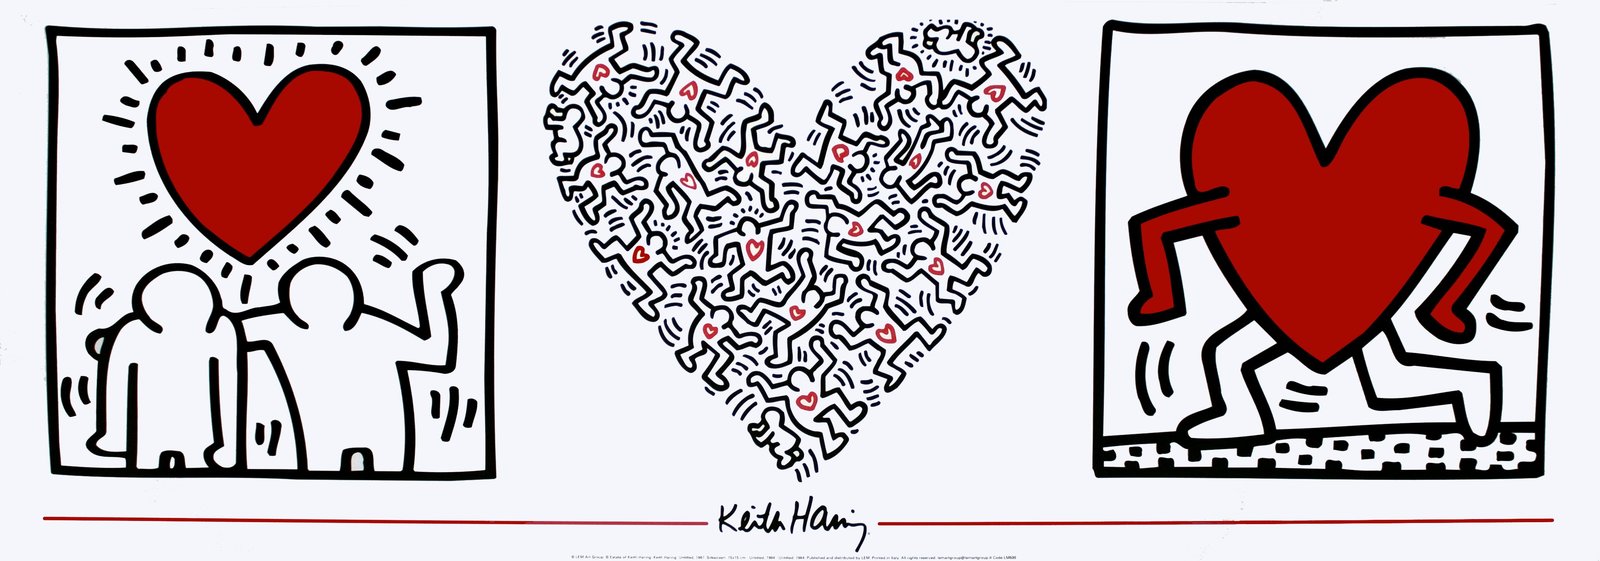 Keith Haring Untitled (1987) 33cm x 95.2cm 1989 Poster Pop Art Red, White